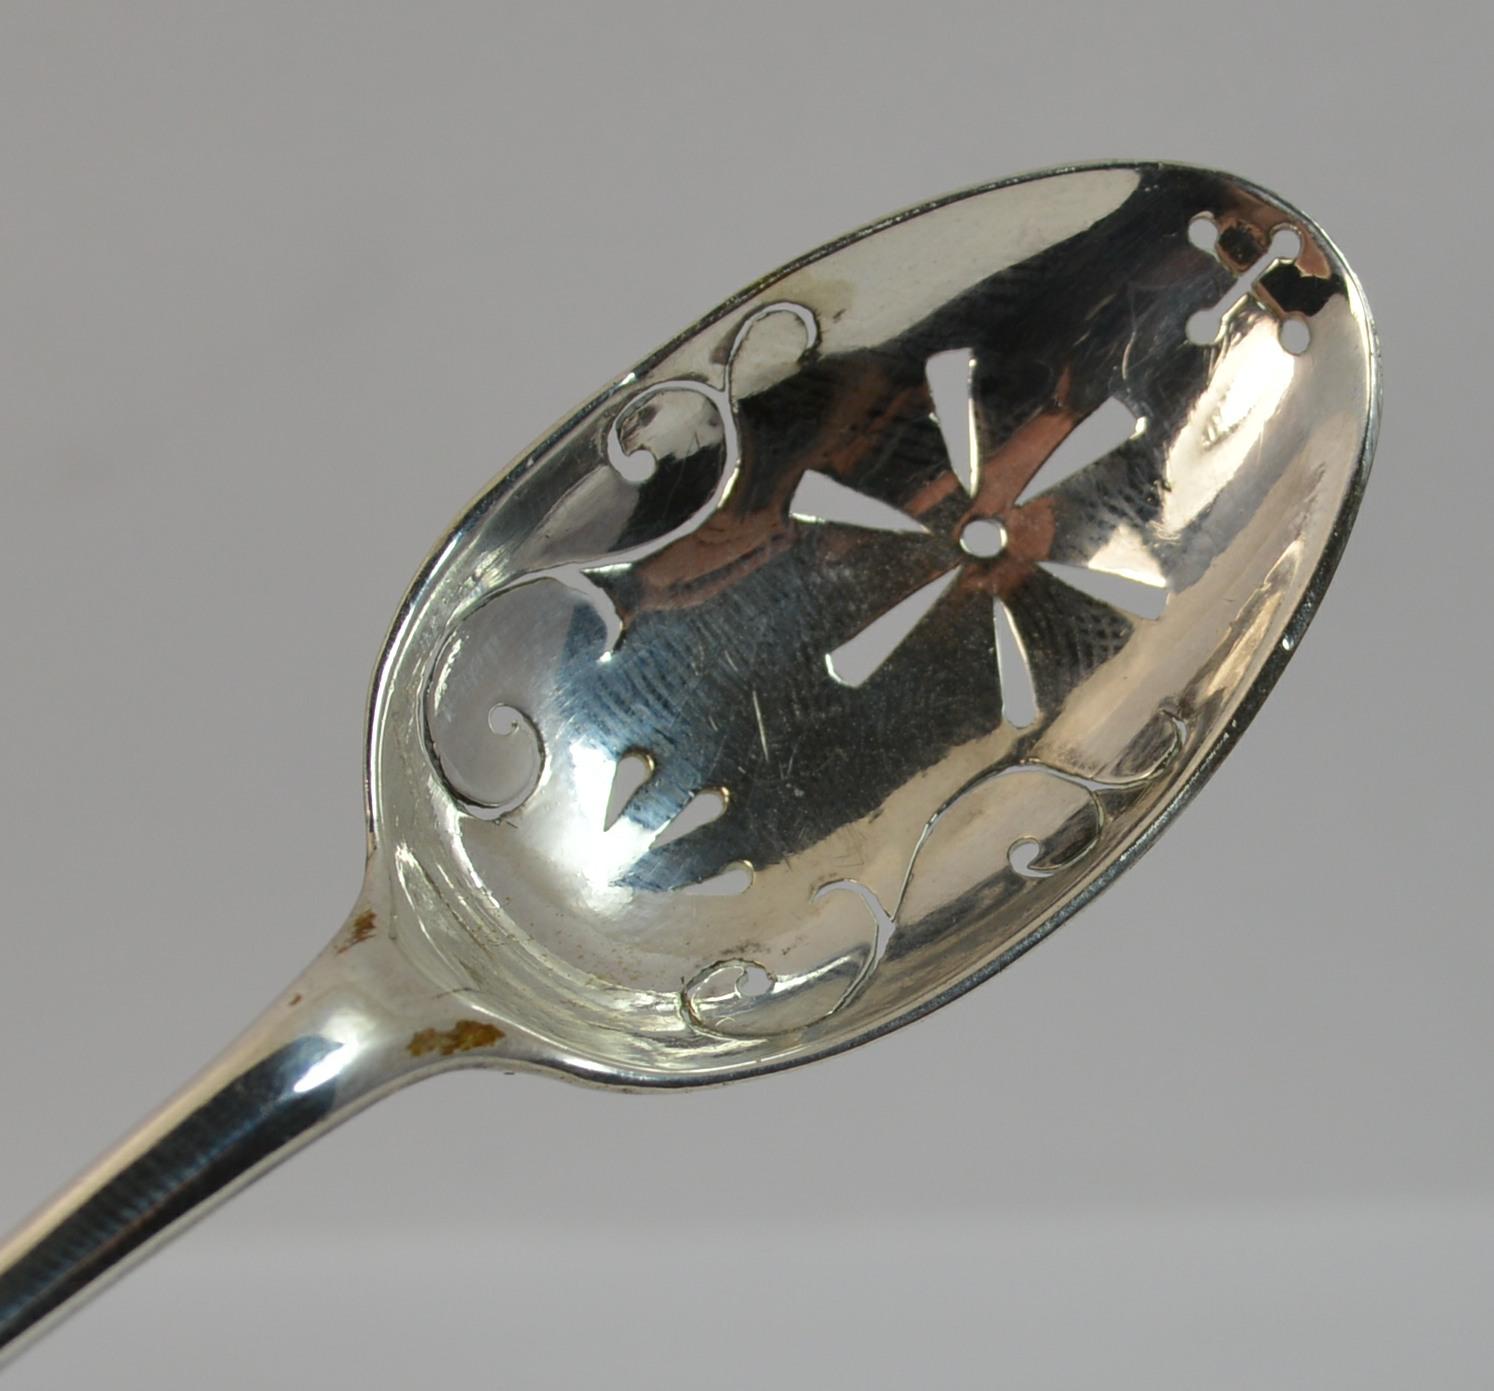 A rare Georgian period solid silver mote spoon. Attractive piece. Pierced bowl. 

Hallmarks ; none, tests as silver
Weight ; 9.9 grams 
Size ; 13cm long, 24mm x 41mm bowl
Condition ; Very good for age. No repairs. Light wear. Issue free. Please view